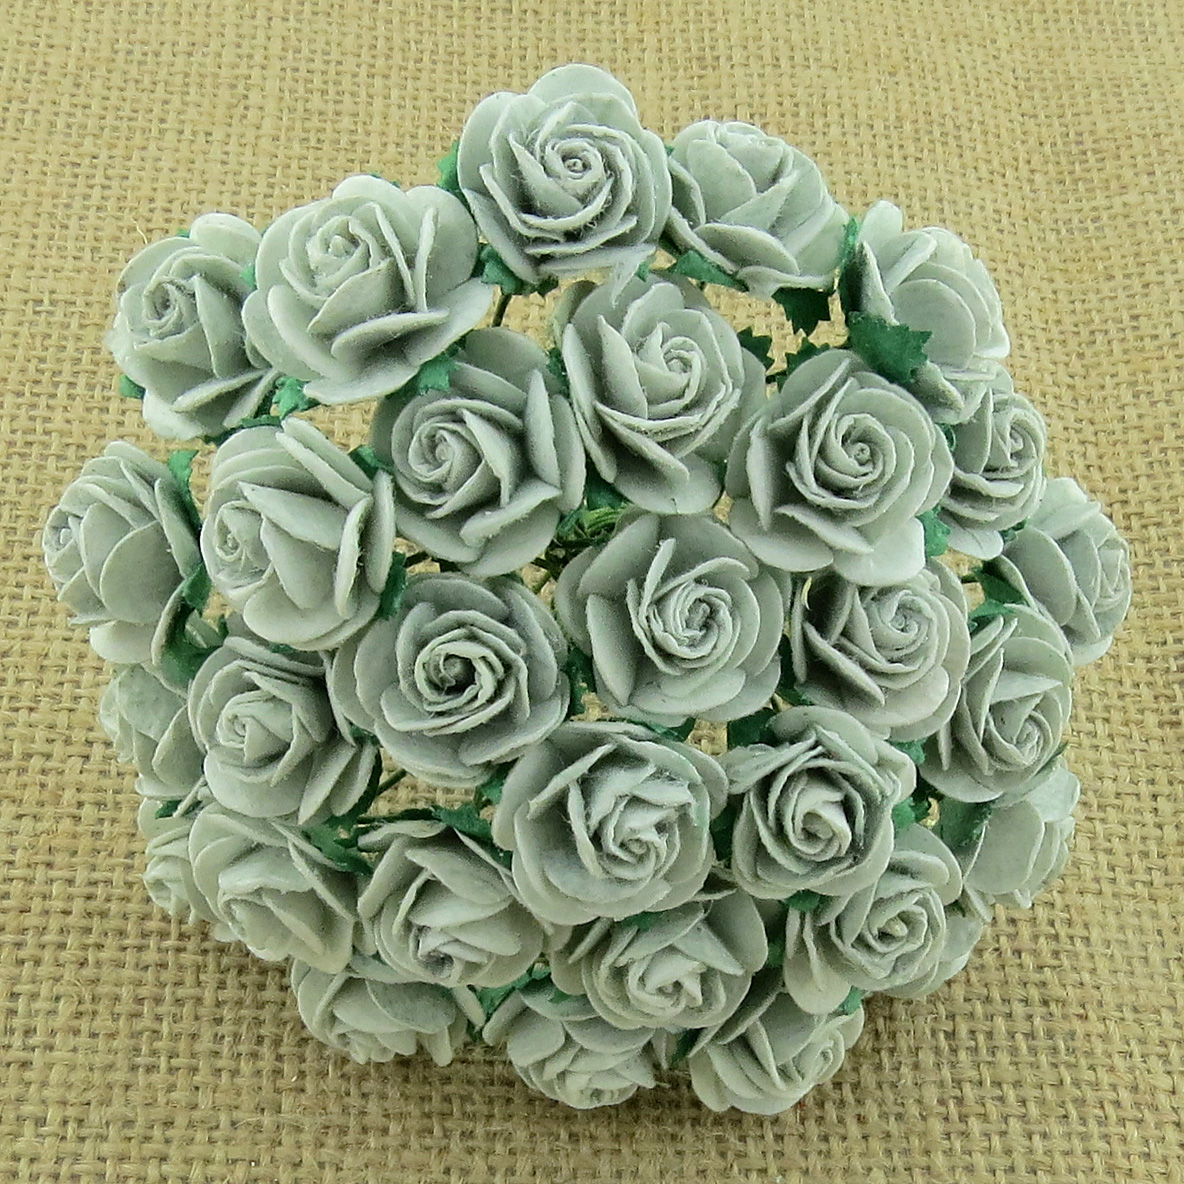 100 SILVER GREY MULBERRY PAPER OPEN ROSES